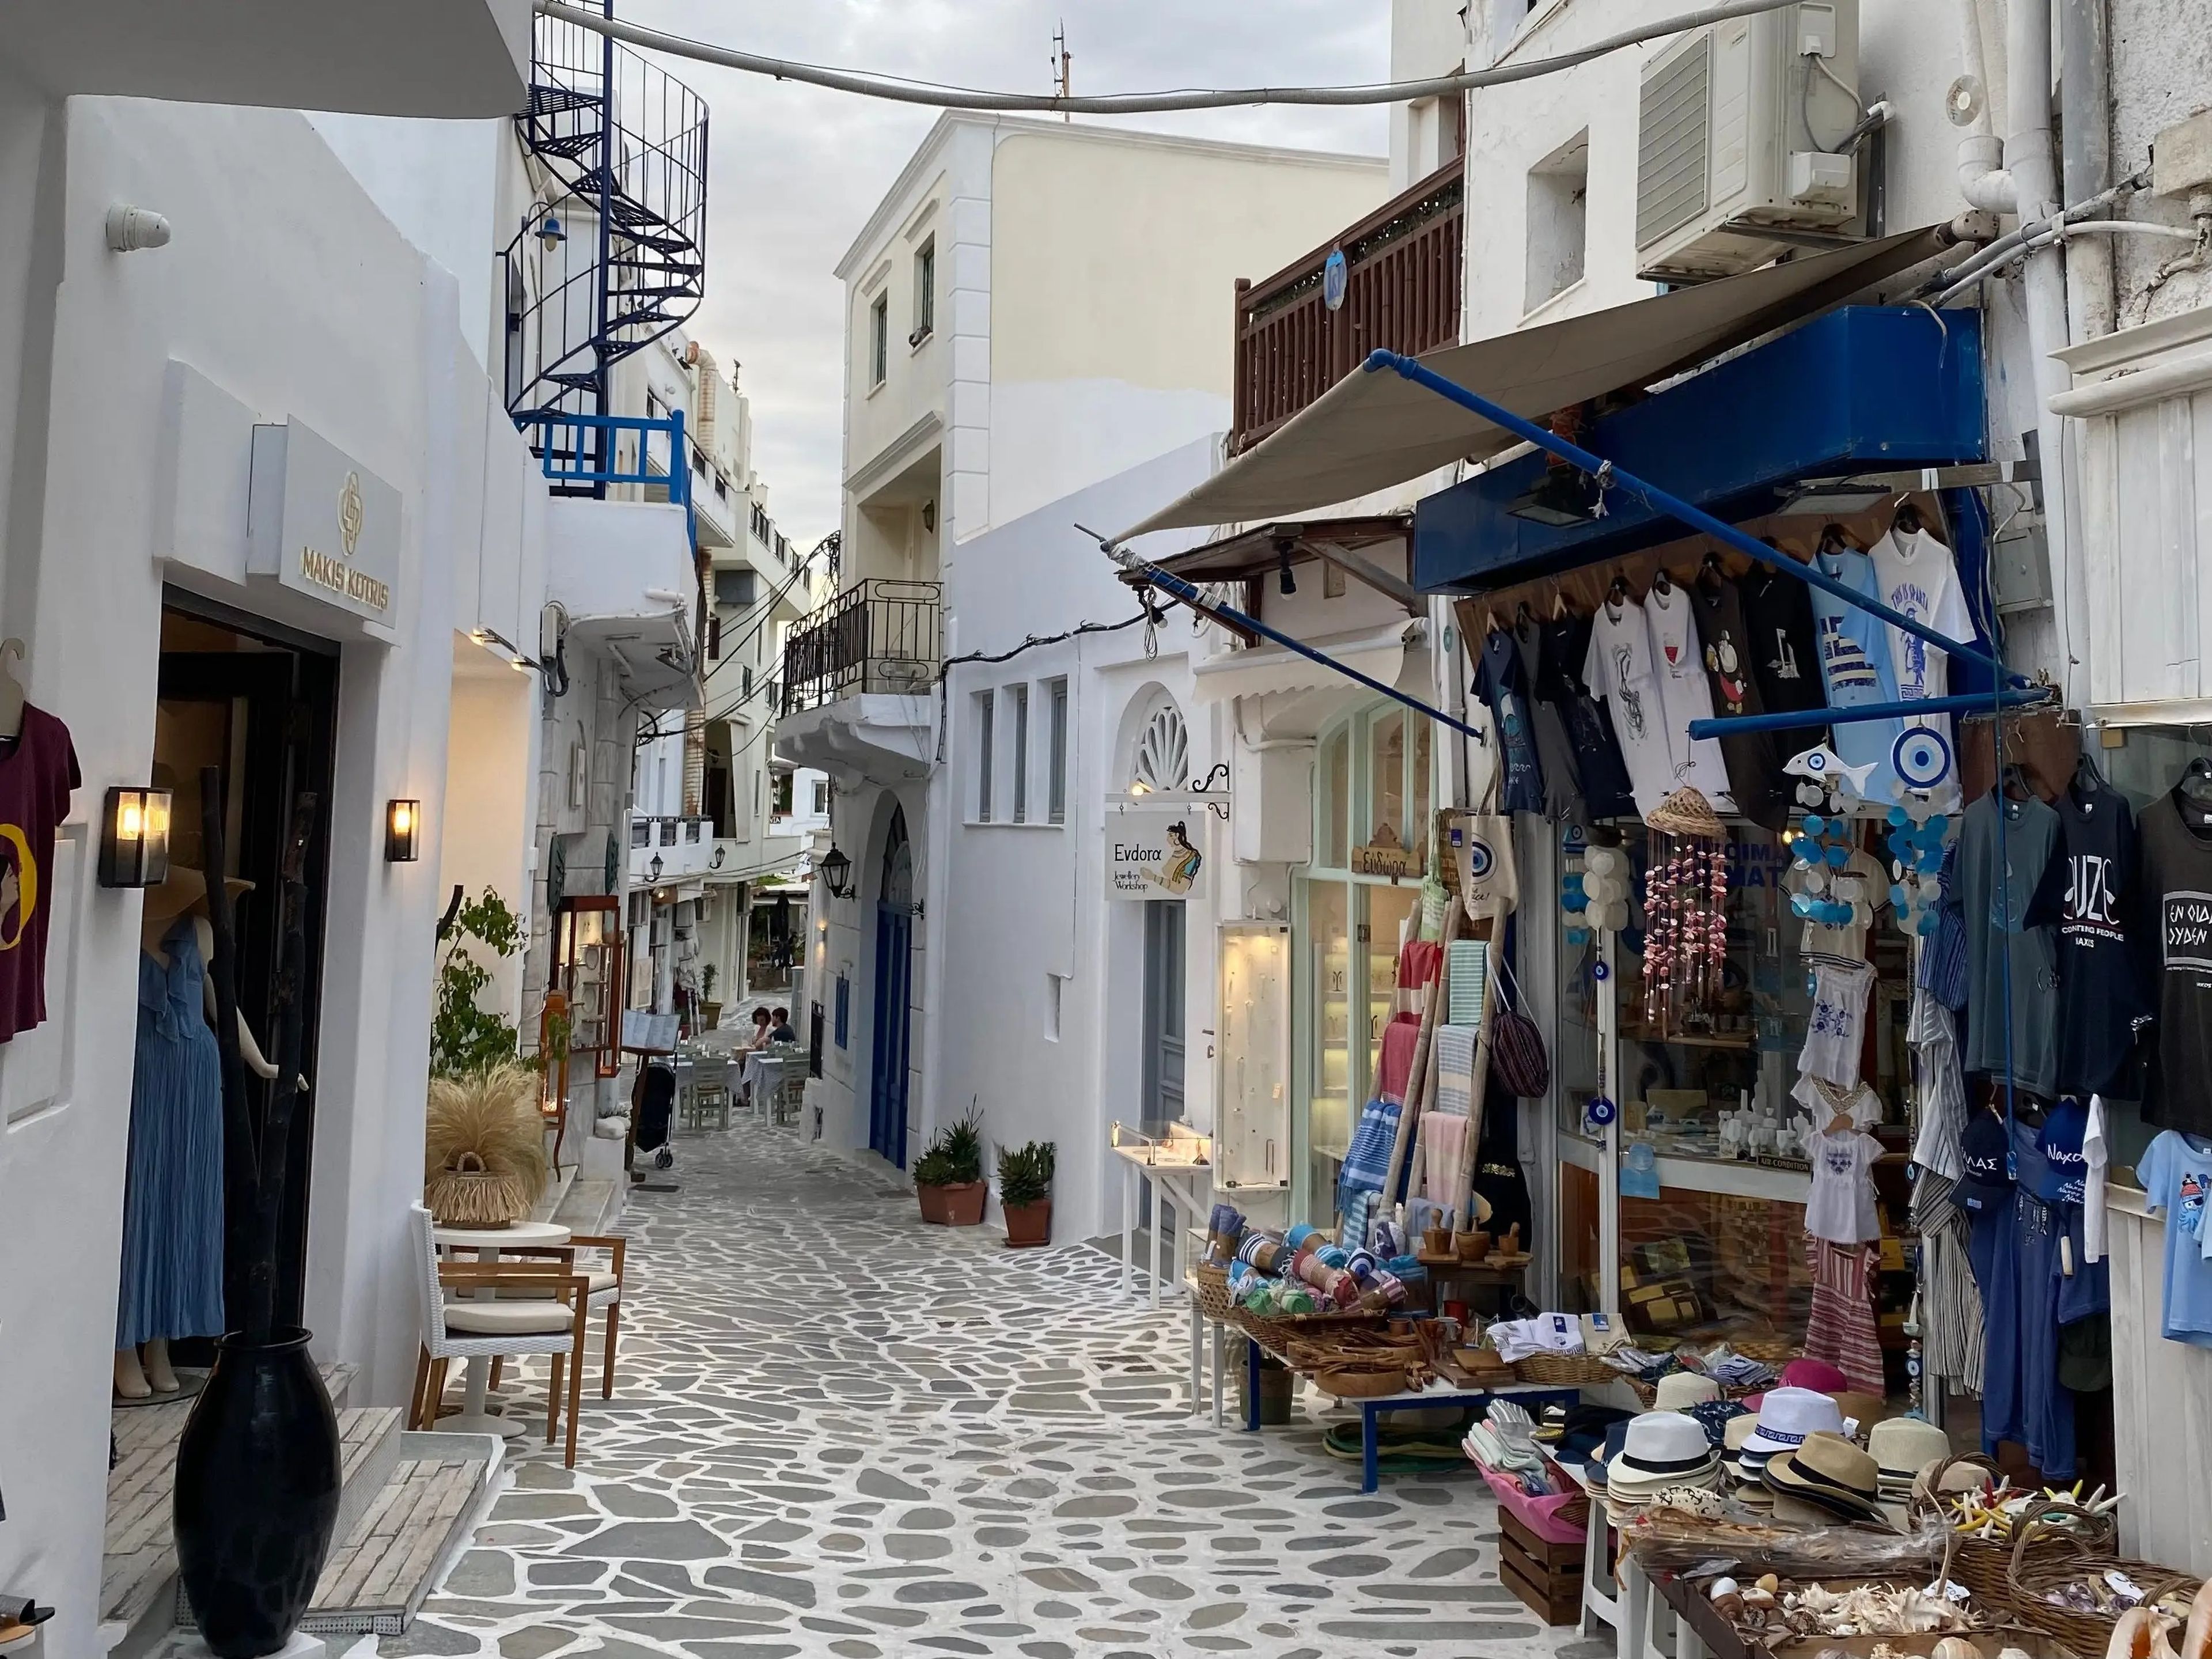 photo of a street in naxos greece with shops and apartments